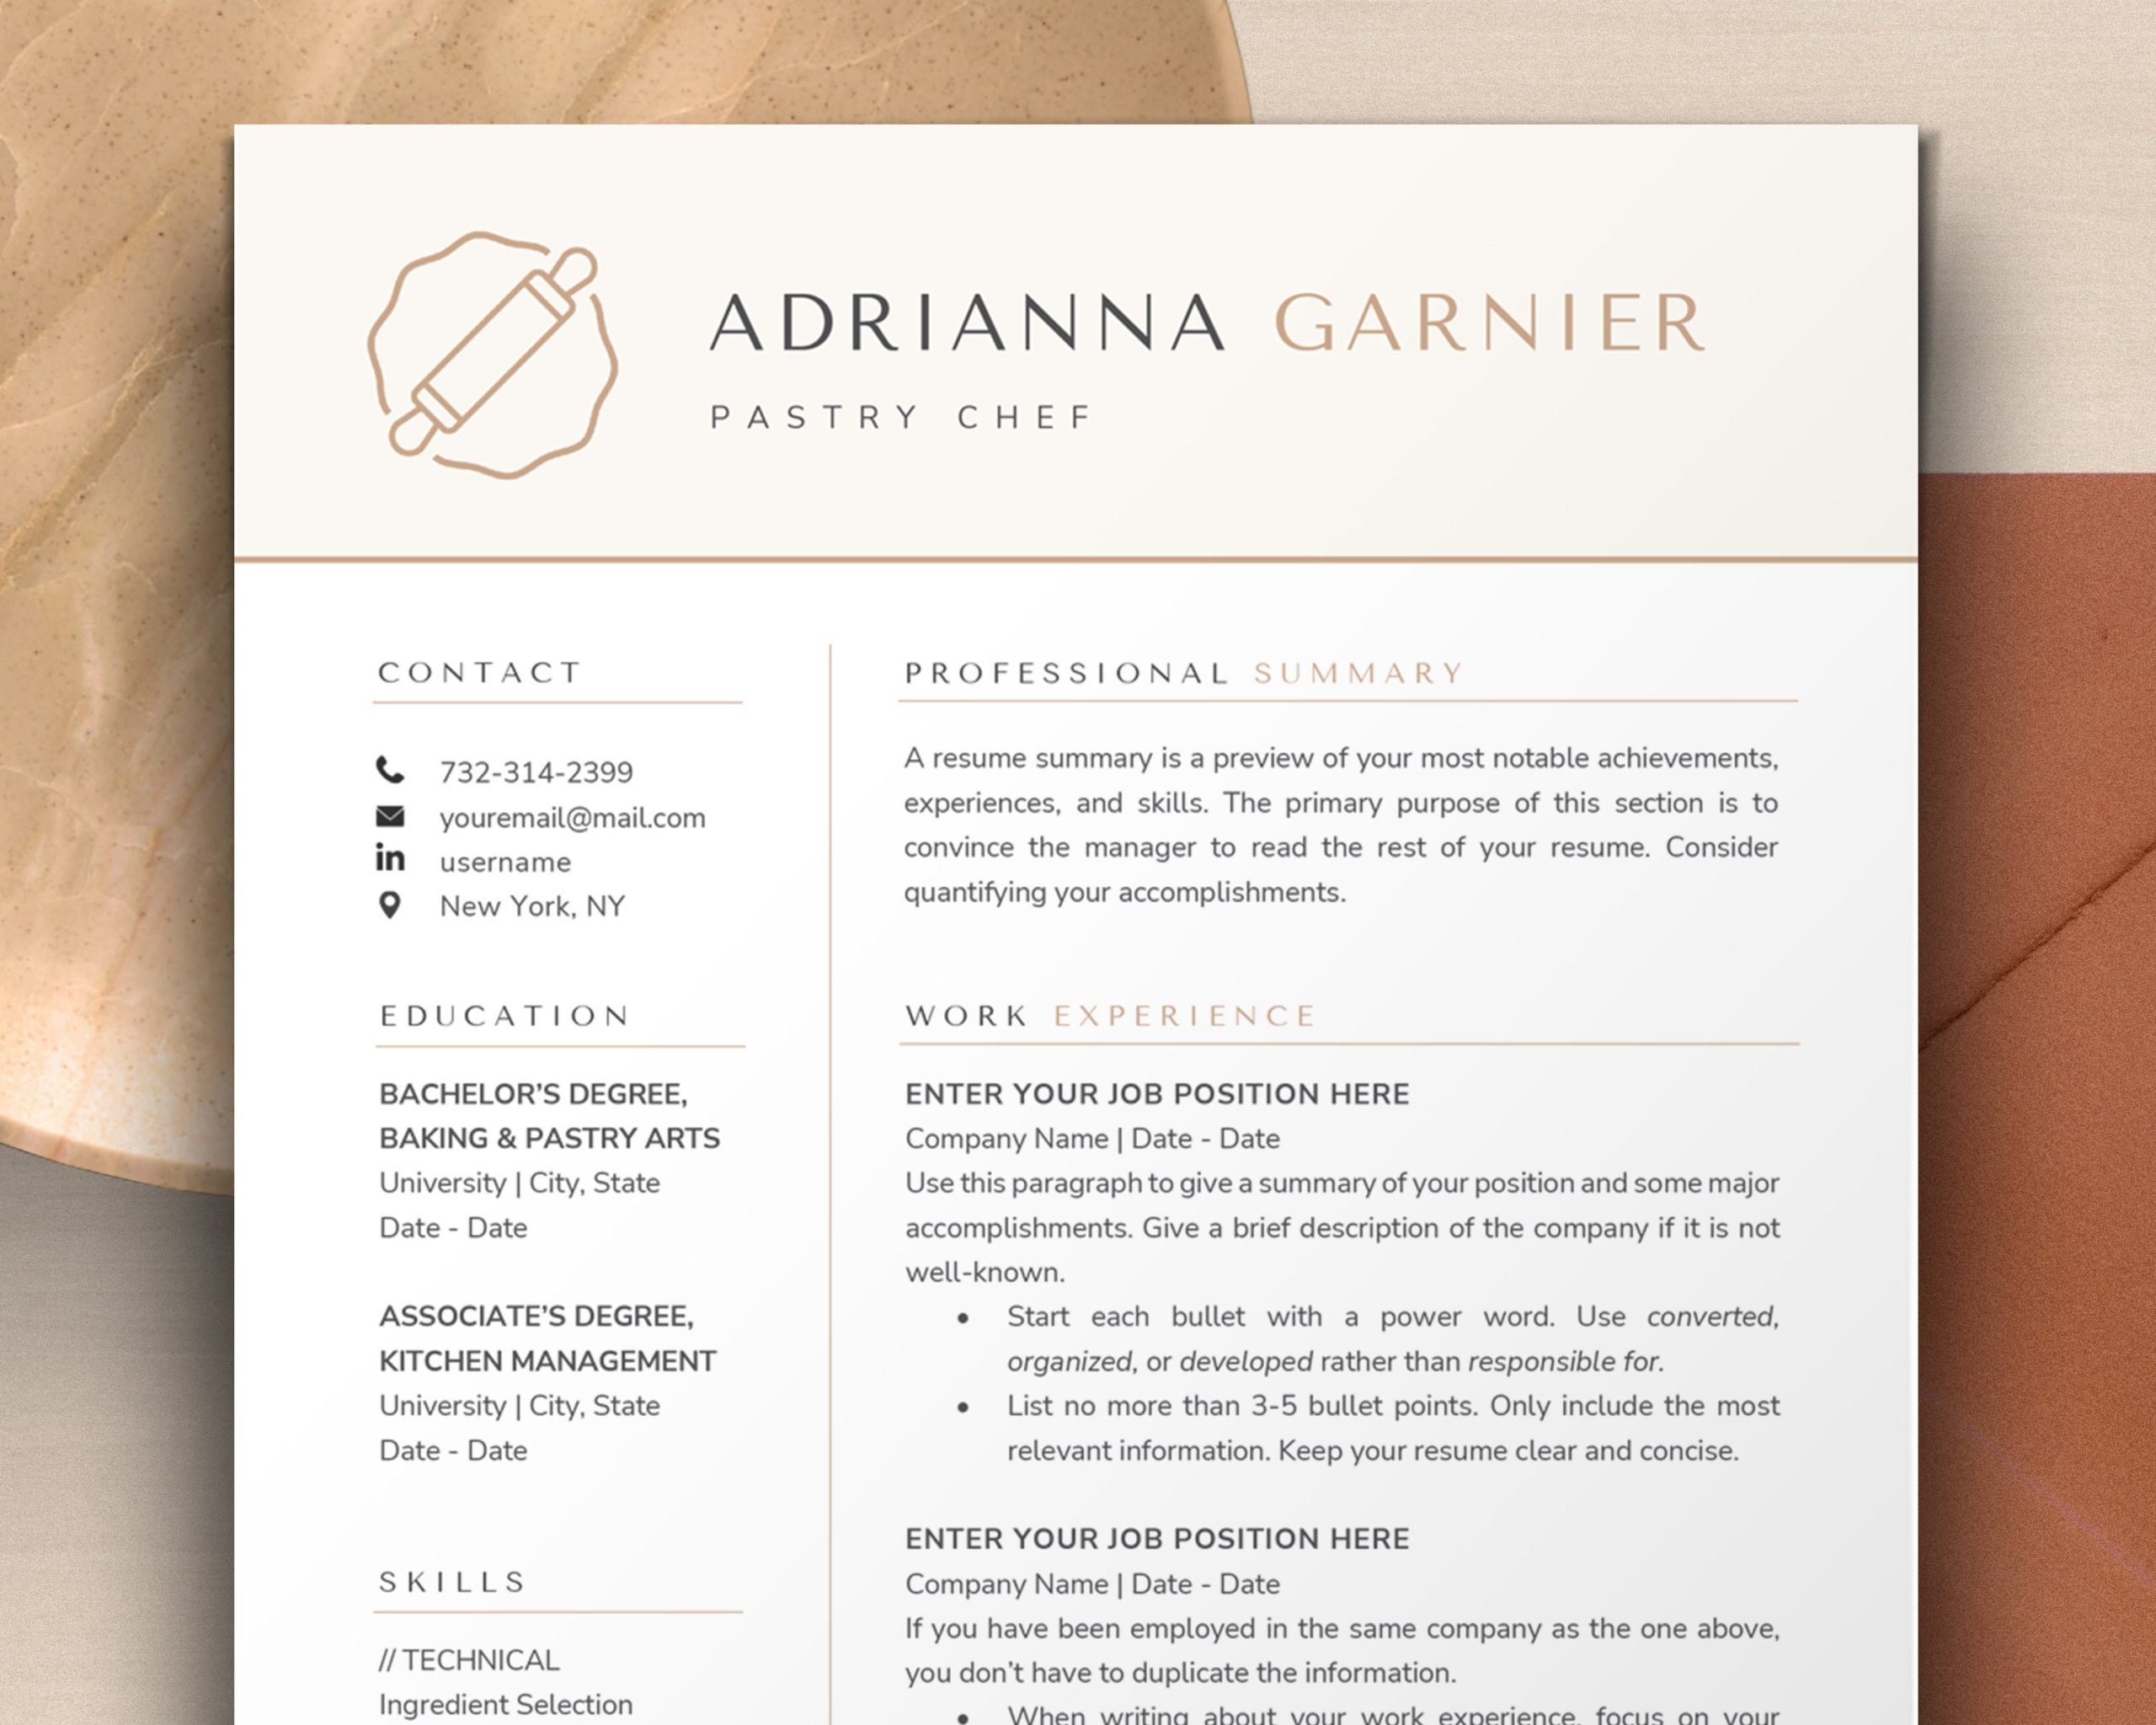 Sample Resume for Baking and Pastry Pastry Chef Resume Template Baker Resume Template PÃ¢tissiÃ¨re …